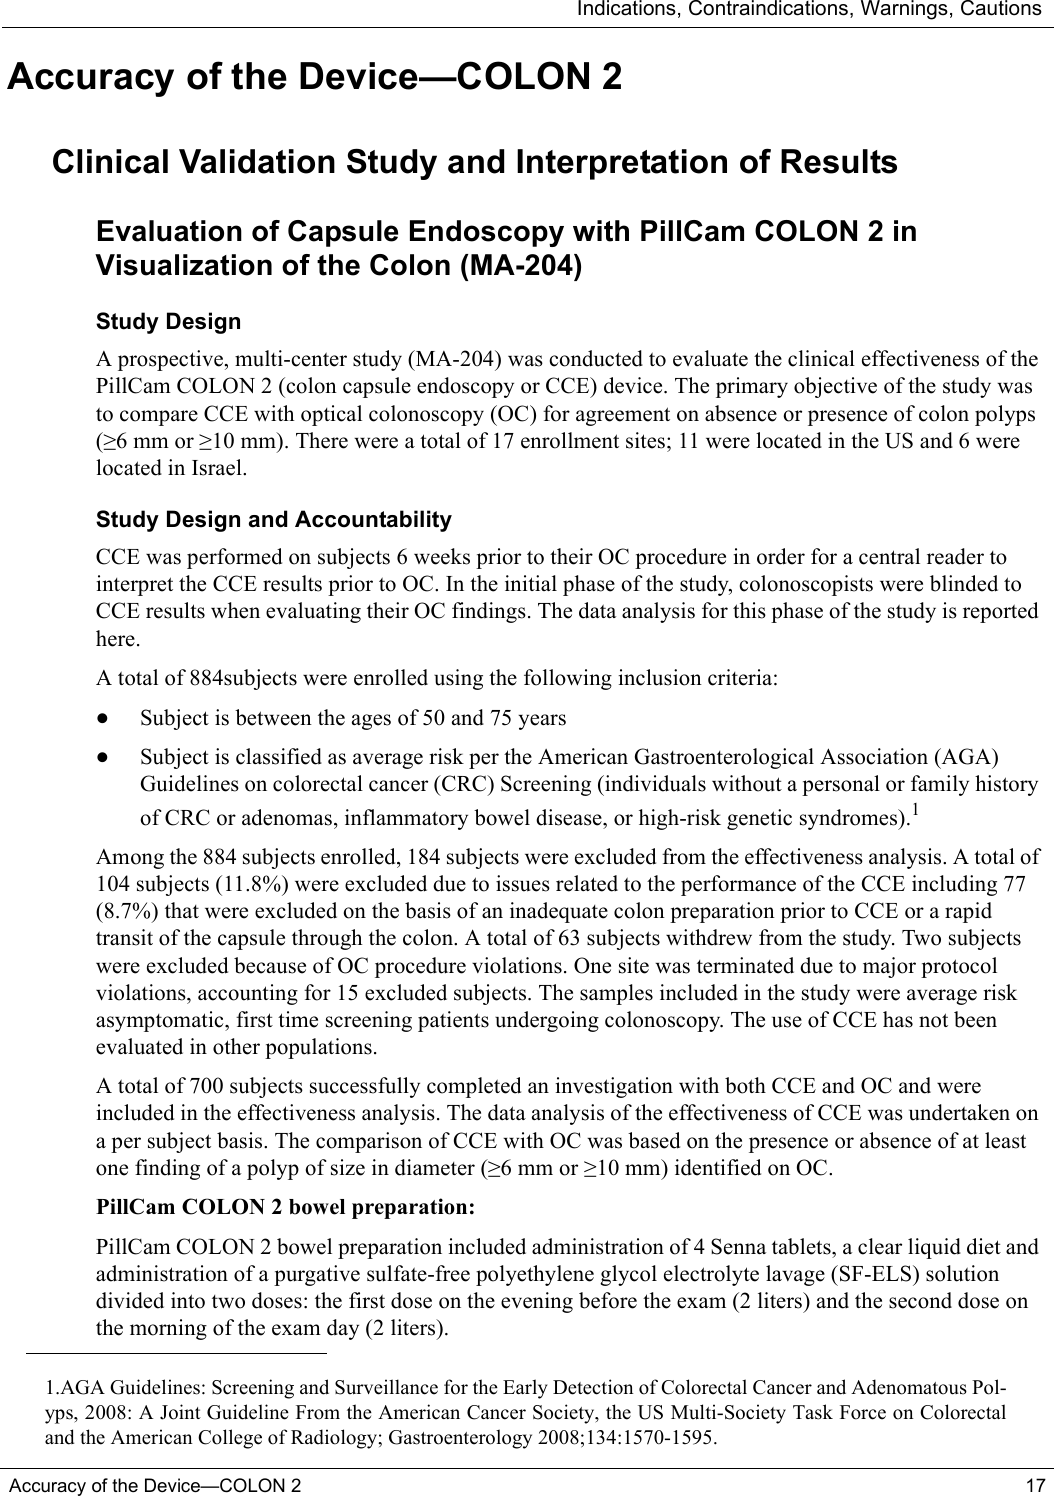 Indications, Contraindications, Warnings, CautionsAccuracy of the Device—COLON 2 17Accuracy of the Device—COLON 2Clinical Validation Study and Interpretation of ResultsEvaluation of Capsule Endoscopy with PillCam COLON 2 in Visualization of the Colon (MA-204)Study Design A prospective, multi-center study (MA-204) was conducted to evaluate the clinical effectiveness of the PillCam COLON 2 (colon capsule endoscopy or CCE) device. The primary objective of the study was to compare CCE with optical colonoscopy (OC) for agreement on absence or presence of colon polyps (≥6 mm or ≥10 mm). There were a total of 17 enrollment sites; 11 were located in the US and 6 were located in Israel.Study Design and AccountabilityCCE was performed on subjects 6 weeks prior to their OC procedure in order for a central reader to interpret the CCE results prior to OC. In the initial phase of the study, colonoscopists were blinded to CCE results when evaluating their OC findings. The data analysis for this phase of the study is reported here.A total of 884subjects were enrolled using the following inclusion criteria: •Subject is between the ages of 50 and 75 years•Subject is classified as average risk per the American Gastroenterological Association (AGA) Guidelines on colorectal cancer (CRC) Screening (individuals without a personal or family history of CRC or adenomas, inflammatory bowel disease, or high-risk genetic syndromes).1Among the 884 subjects enrolled, 184 subjects were excluded from the effectiveness analysis. A total of 104 subjects (11.8%) were excluded due to issues related to the performance of the CCE including 77 (8.7%) that were excluded on the basis of an inadequate colon preparation prior to CCE or a rapid transit of the capsule through the colon. A total of 63 subjects withdrew from the study. Two subjects were excluded because of OC procedure violations. One site was terminated due to major protocol violations, accounting for 15 excluded subjects. The samples included in the study were average risk asymptomatic, first time screening patients undergoing colonoscopy. The use of CCE has not been evaluated in other populations. A total of 700 subjects successfully completed an investigation with both CCE and OC and were included in the effectiveness analysis. The data analysis of the effectiveness of CCE was undertaken on a per subject basis. The comparison of CCE with OC was based on the presence or absence of at least one finding of a polyp of size in diameter (≥6 mm or ≥10 mm) identified on OC. PillCam COLON 2 bowel preparation:PillCam COLON 2 bowel preparation included administration of 4 Senna tablets, a clear liquid diet and administration of a purgative sulfate-free polyethylene glycol electrolyte lavage (SF-ELS) solution divided into two doses: the first dose on the evening before the exam (2 liters) and the second dose on the morning of the exam day (2 liters).1.AGA Guidelines: Screening and Surveillance for the Early Detection of Colorectal Cancer and Adenomatous Pol-yps, 2008: A Joint Guideline From the American Cancer Society, the US Multi-Society Task Force on Colorectaland the American College of Radiology; Gastroenterology 2008;134:1570-1595.